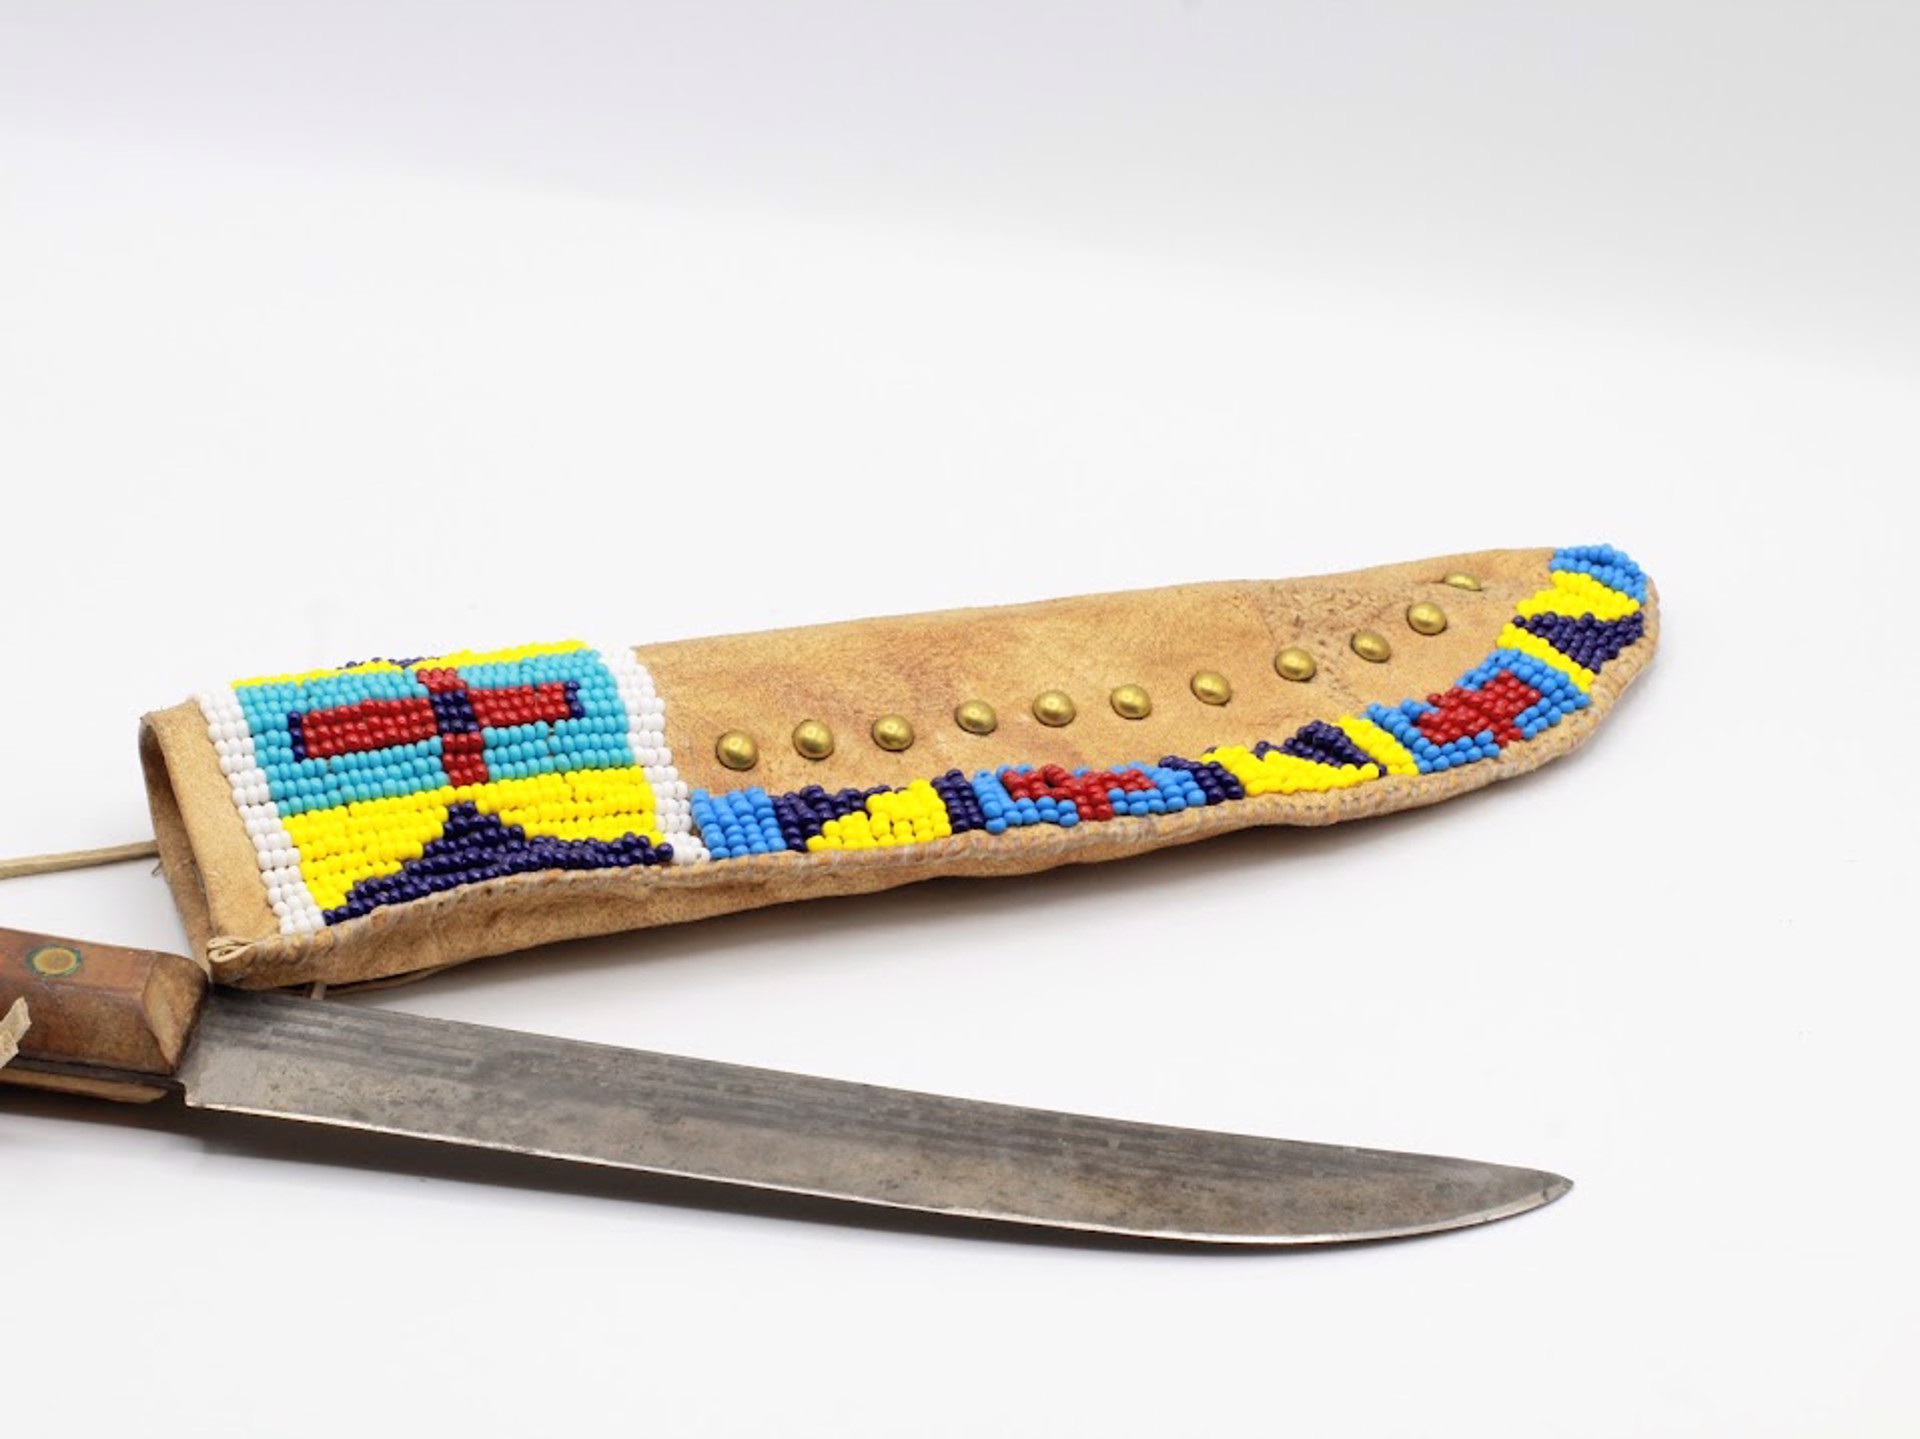 Northern Plains Indian Knife and Sheath by Mark Collins